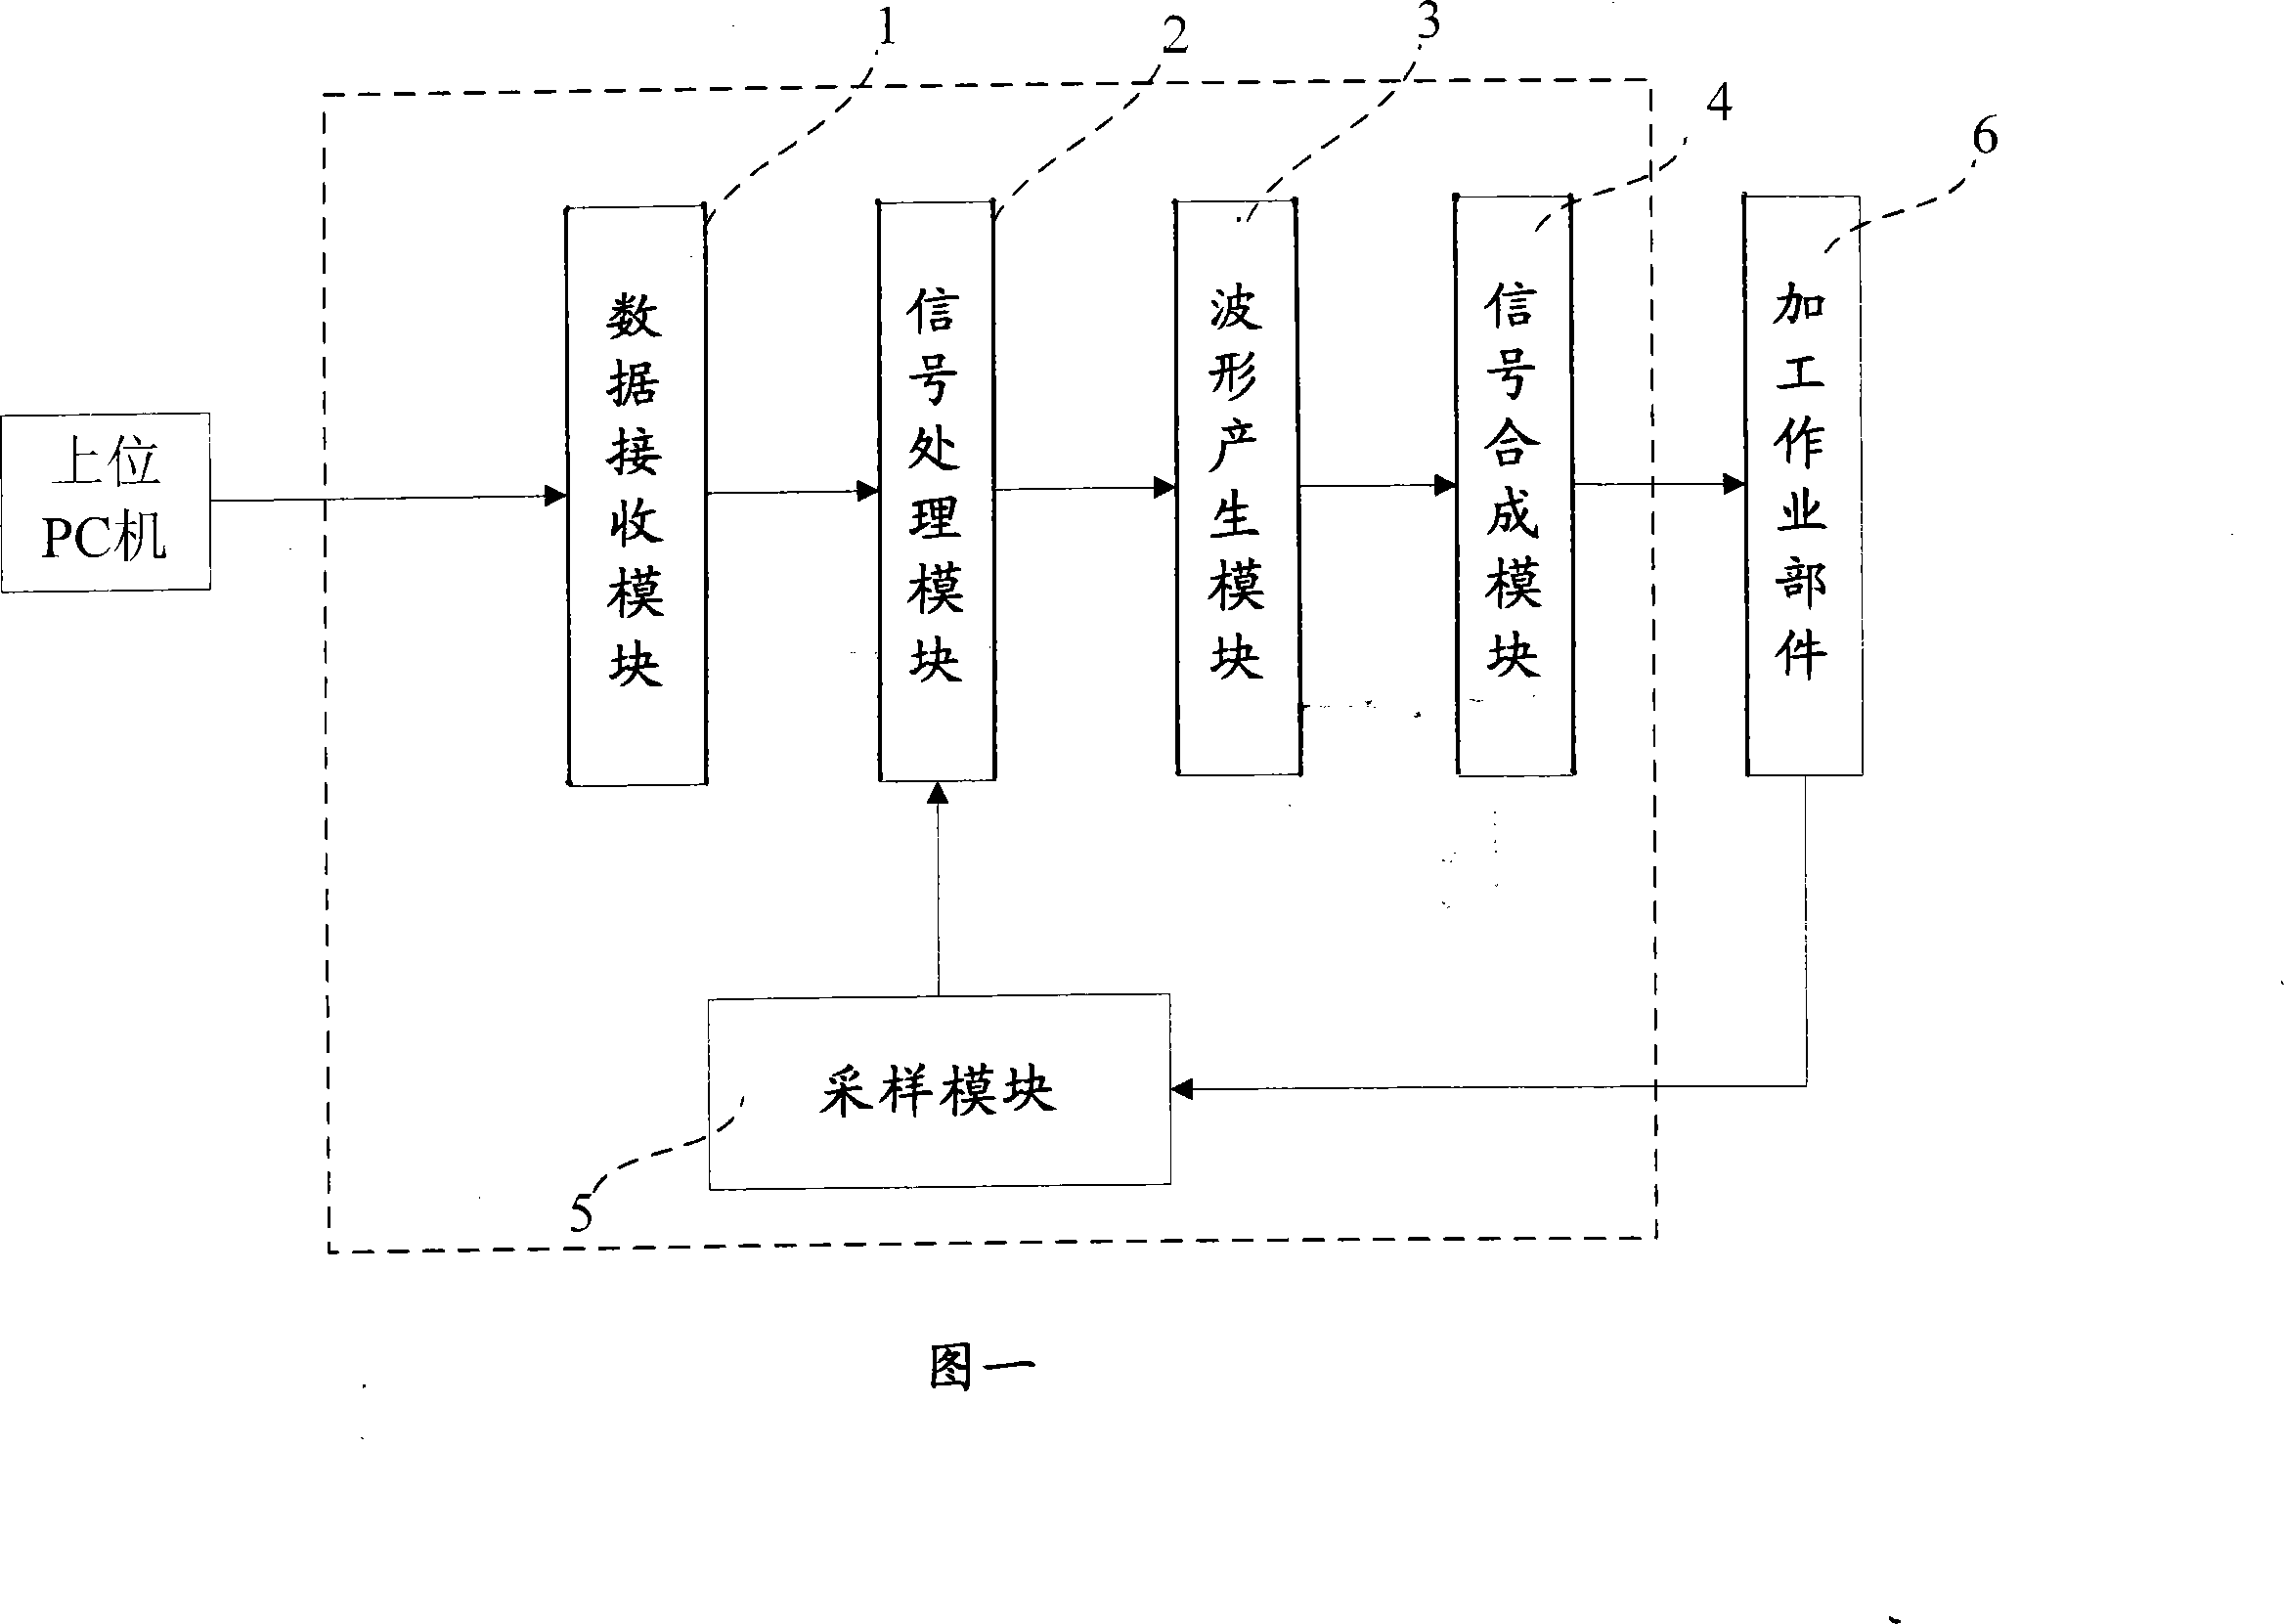 Numeralization integrated impulsing power source chip